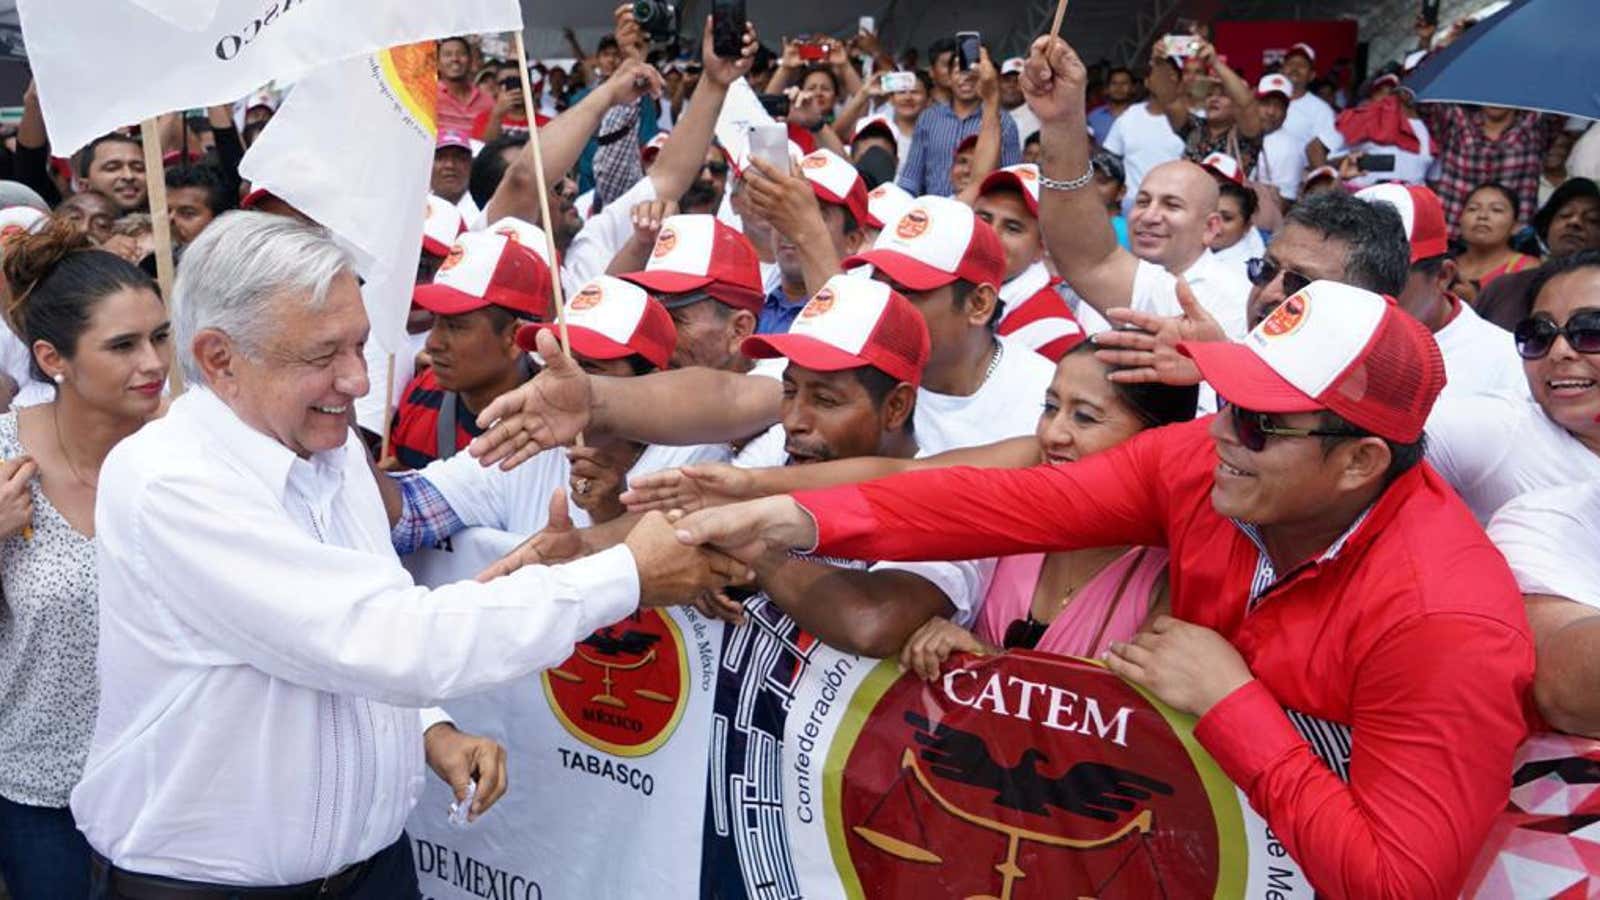 Lopez Obrador greeted supporters near the Dos Bocas refinery site in 2019.